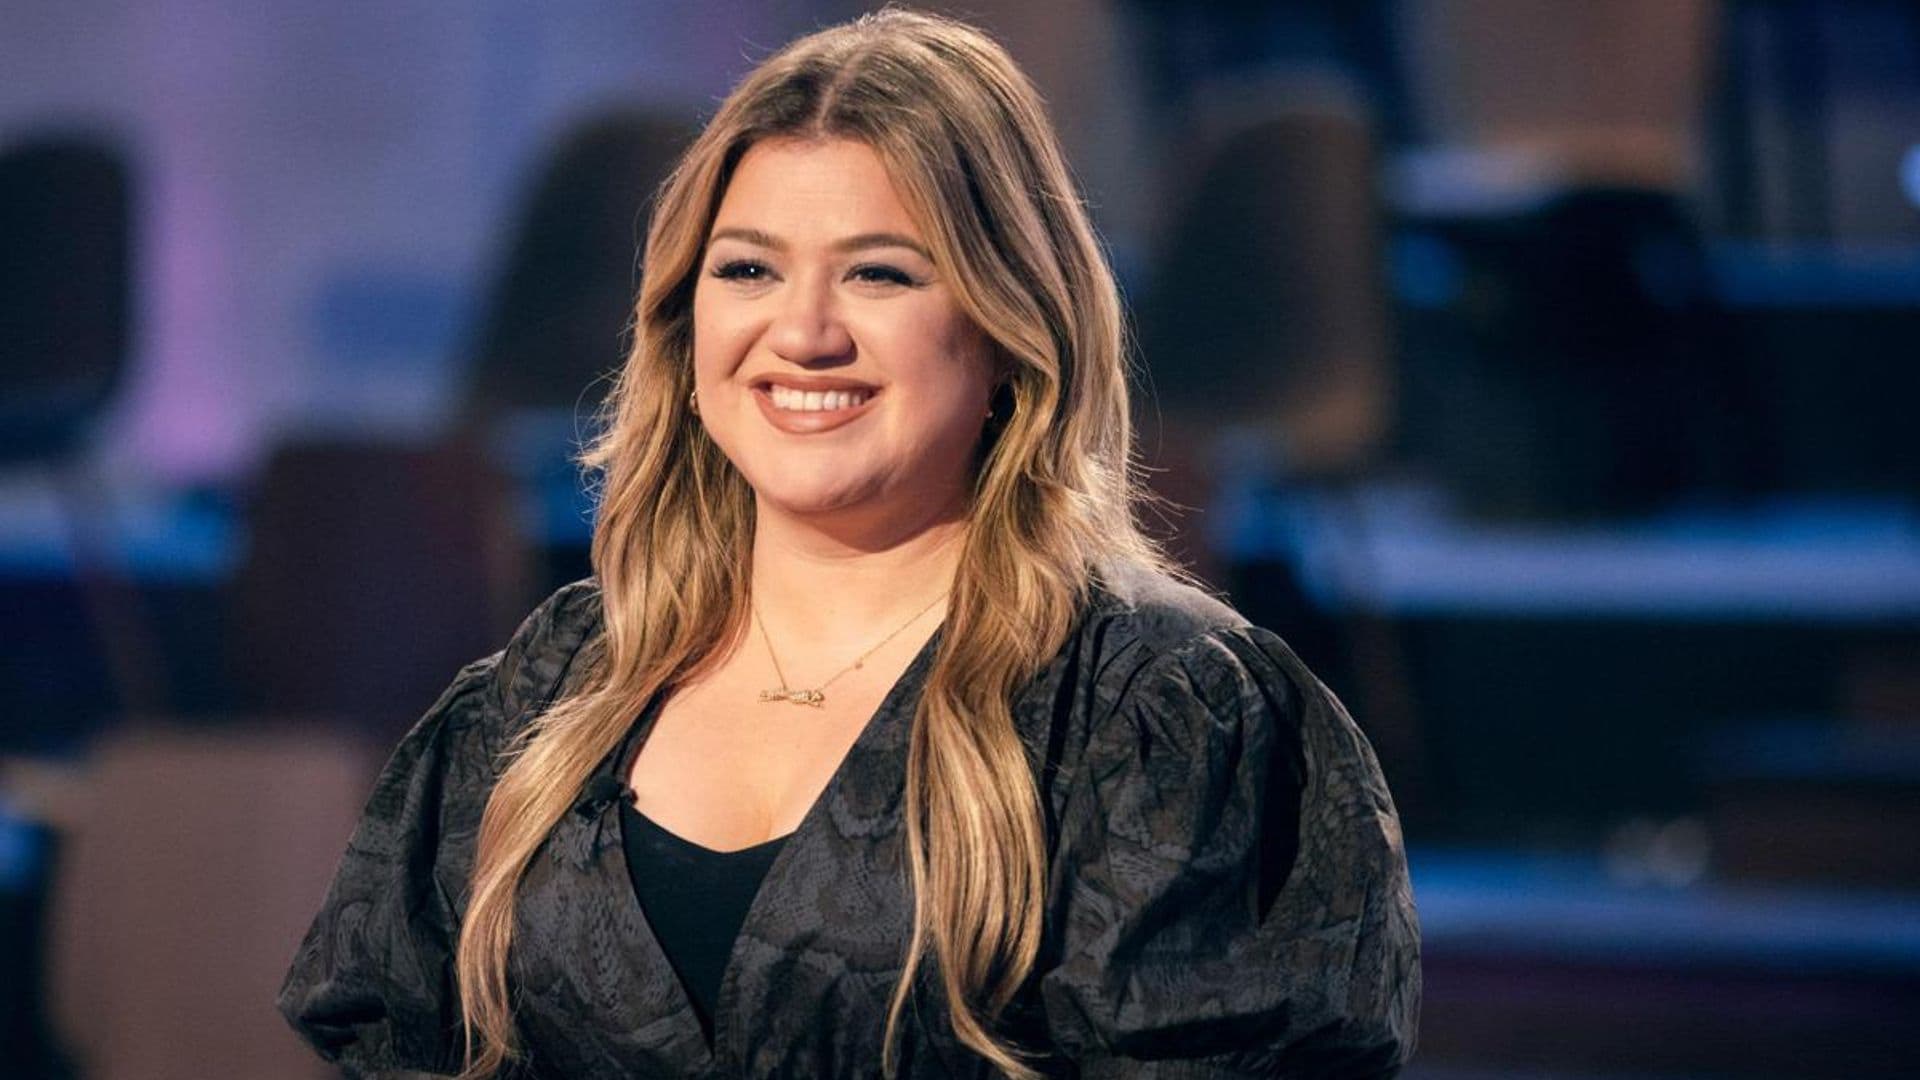 Kelly Clarkson files to drop her father’s last name to legally become Kelly Brianne